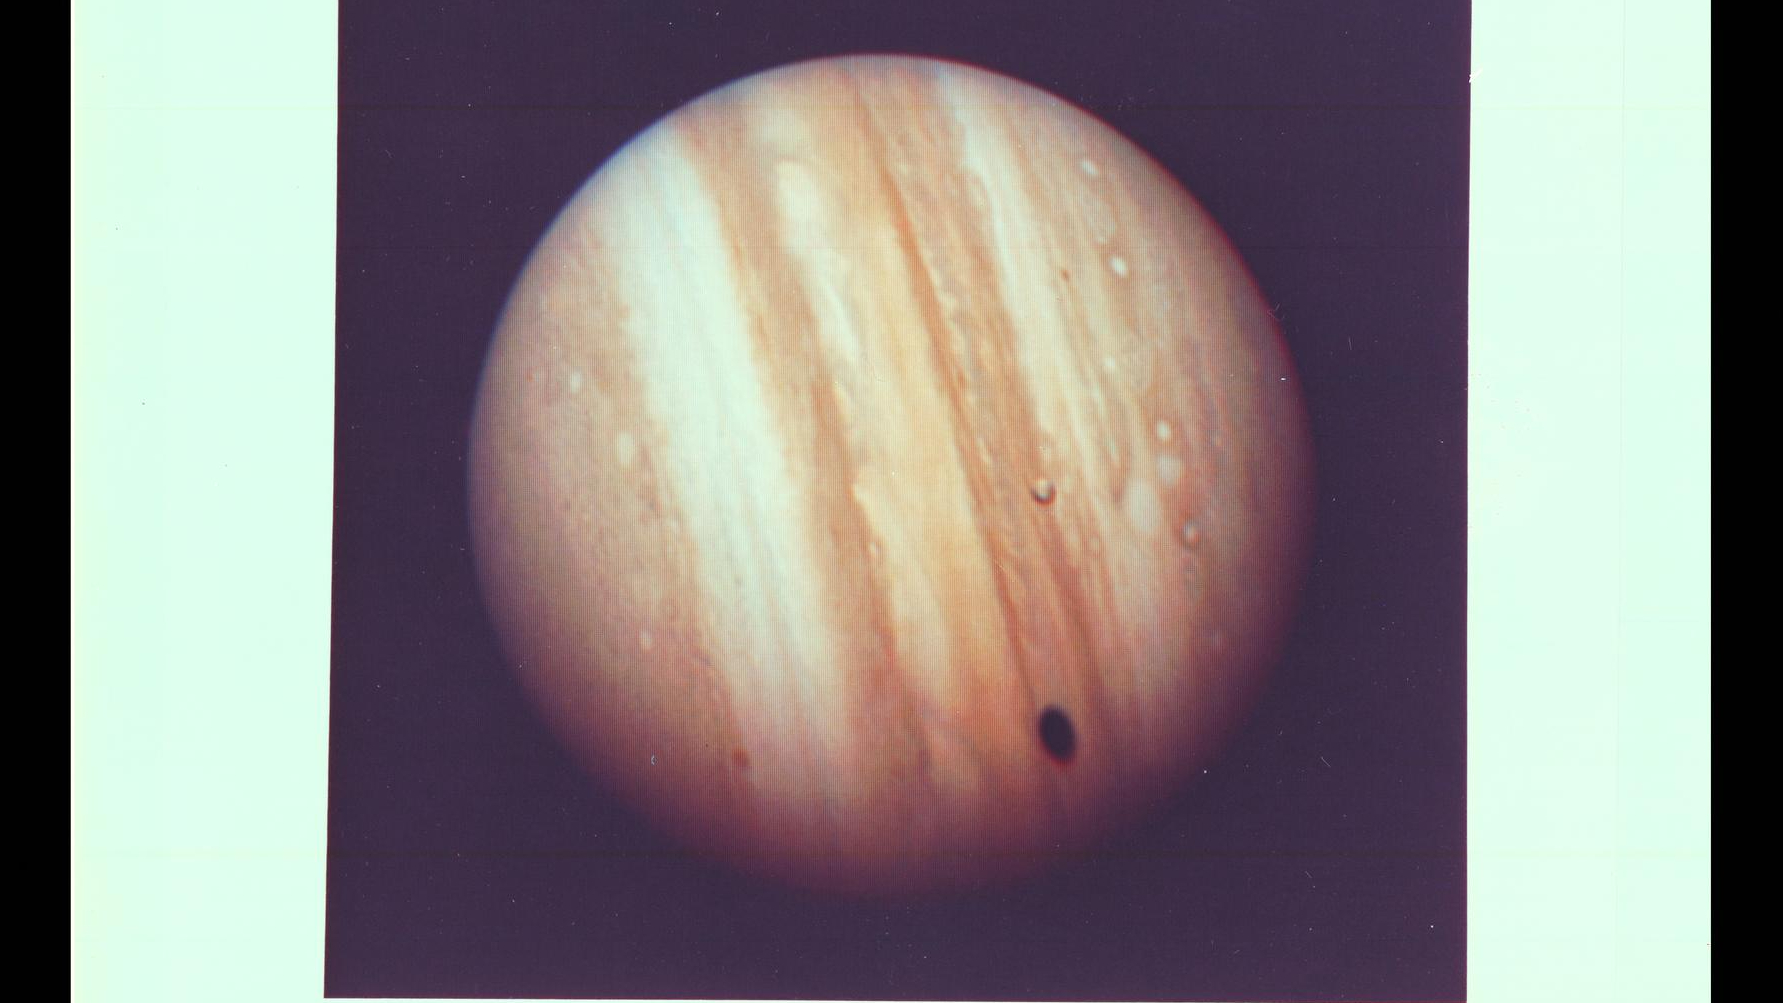 Jupiter imaged by Voyager 1 shows a brown/orange planet with a small moon in front. The shadow from Io is projected onto the Jovian atmosphere.